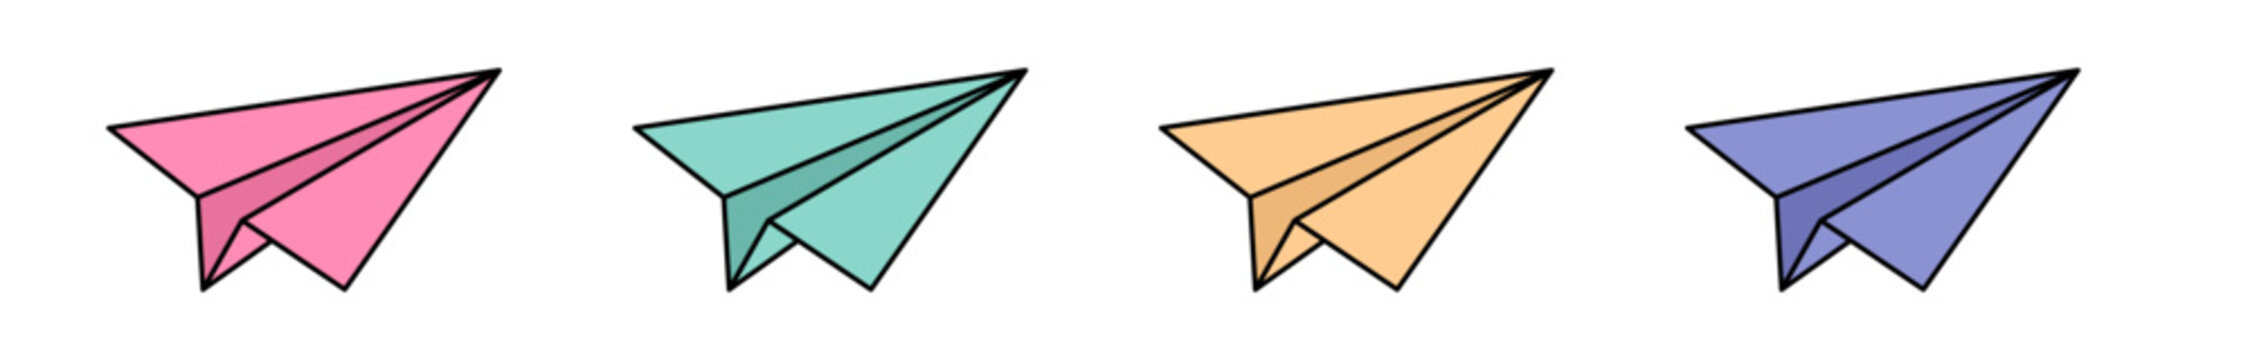 Flying paper airplane set. Vector set of colored paper airplanes. Origami aircraft in flat style. Handmade paper planes collection. Folded origami toys. Vector illustration.